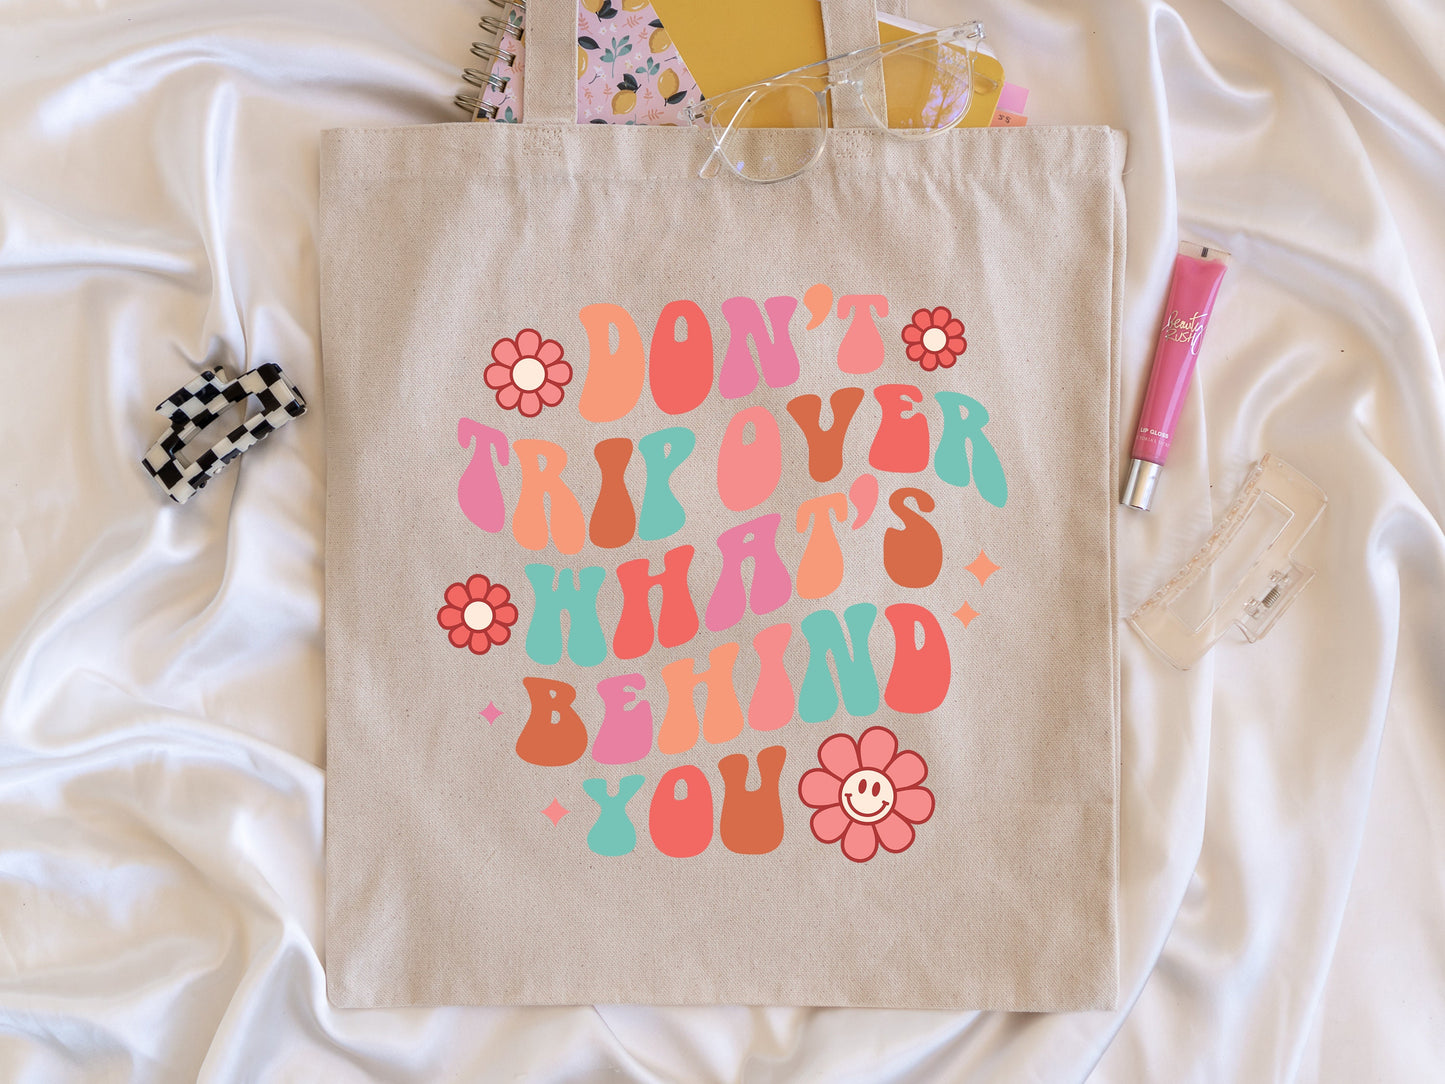 Don't worry about things you can not control, Positive, Anxiety, Mental Health, Aesthetic, Preppy, Preppy Tote, Preppy Bag